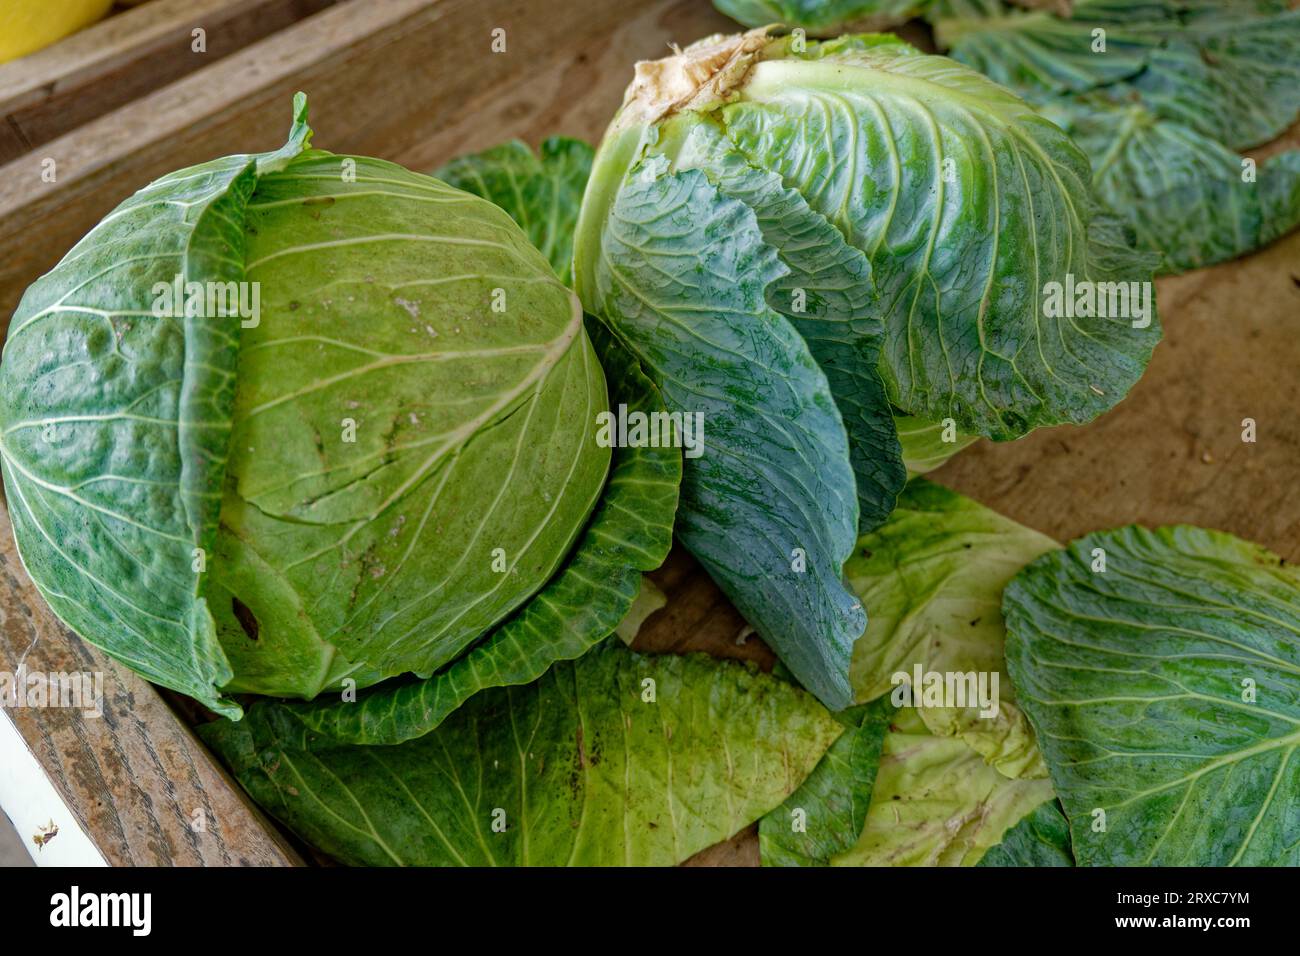 Large leafy green cabbage heads in a wooden crate at a farmers market in early fall closeup view Stock Photo